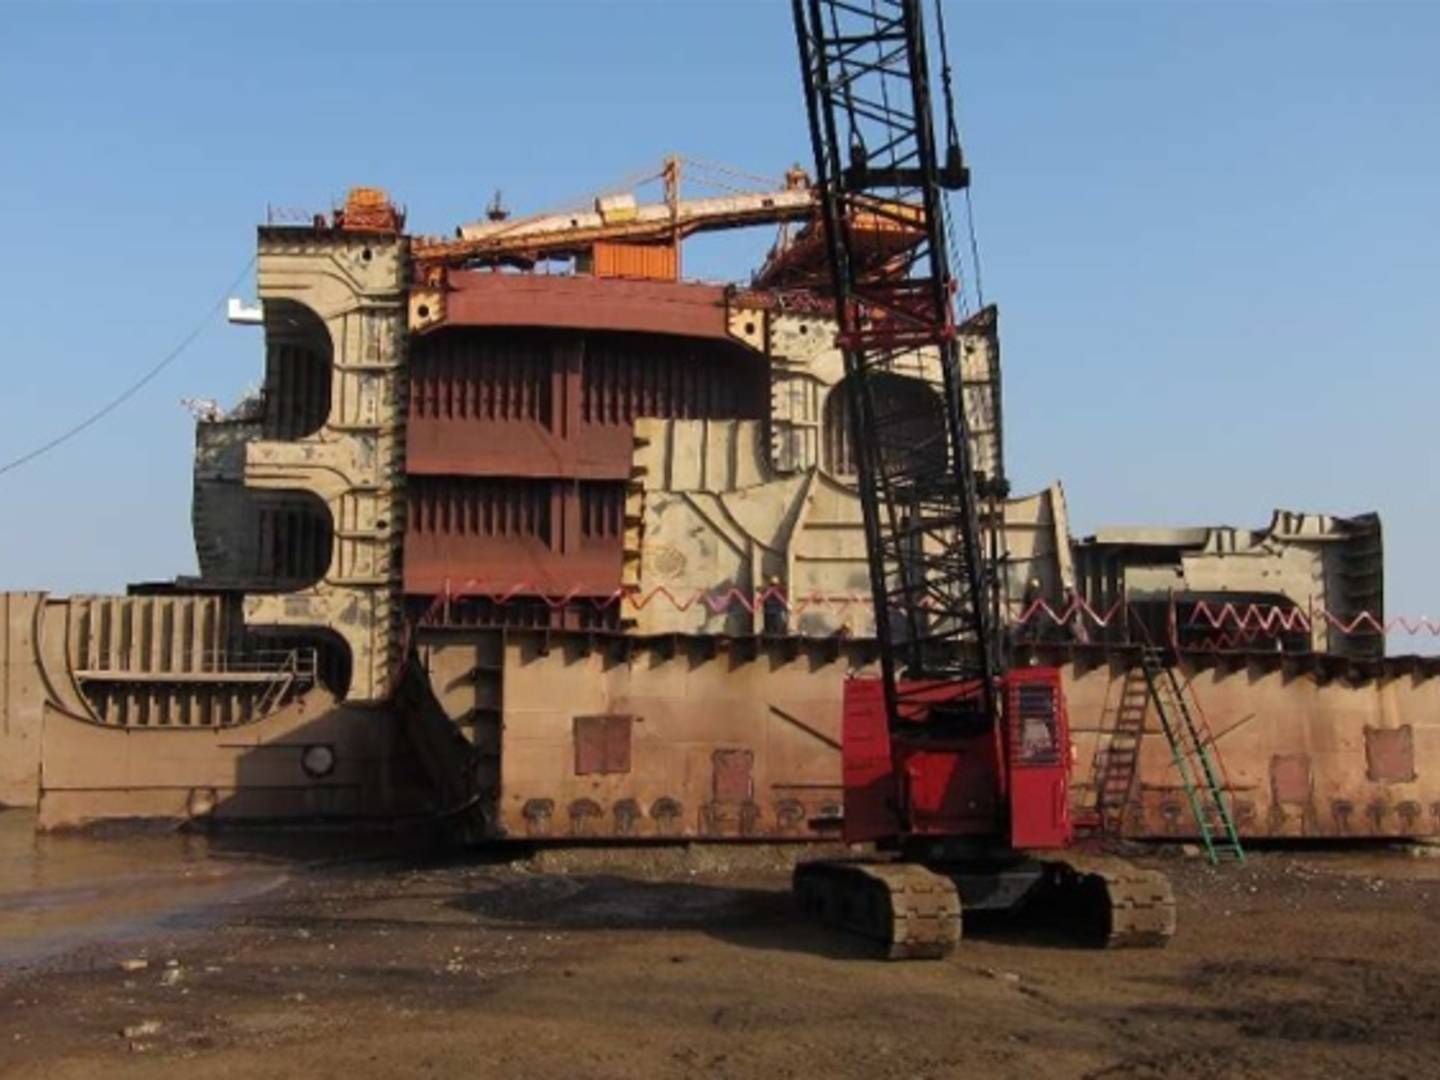 Scrapping of vessel at beaching yard in Alang, India. | Photo: DNV GL / Kommissionens inspektionsrapport